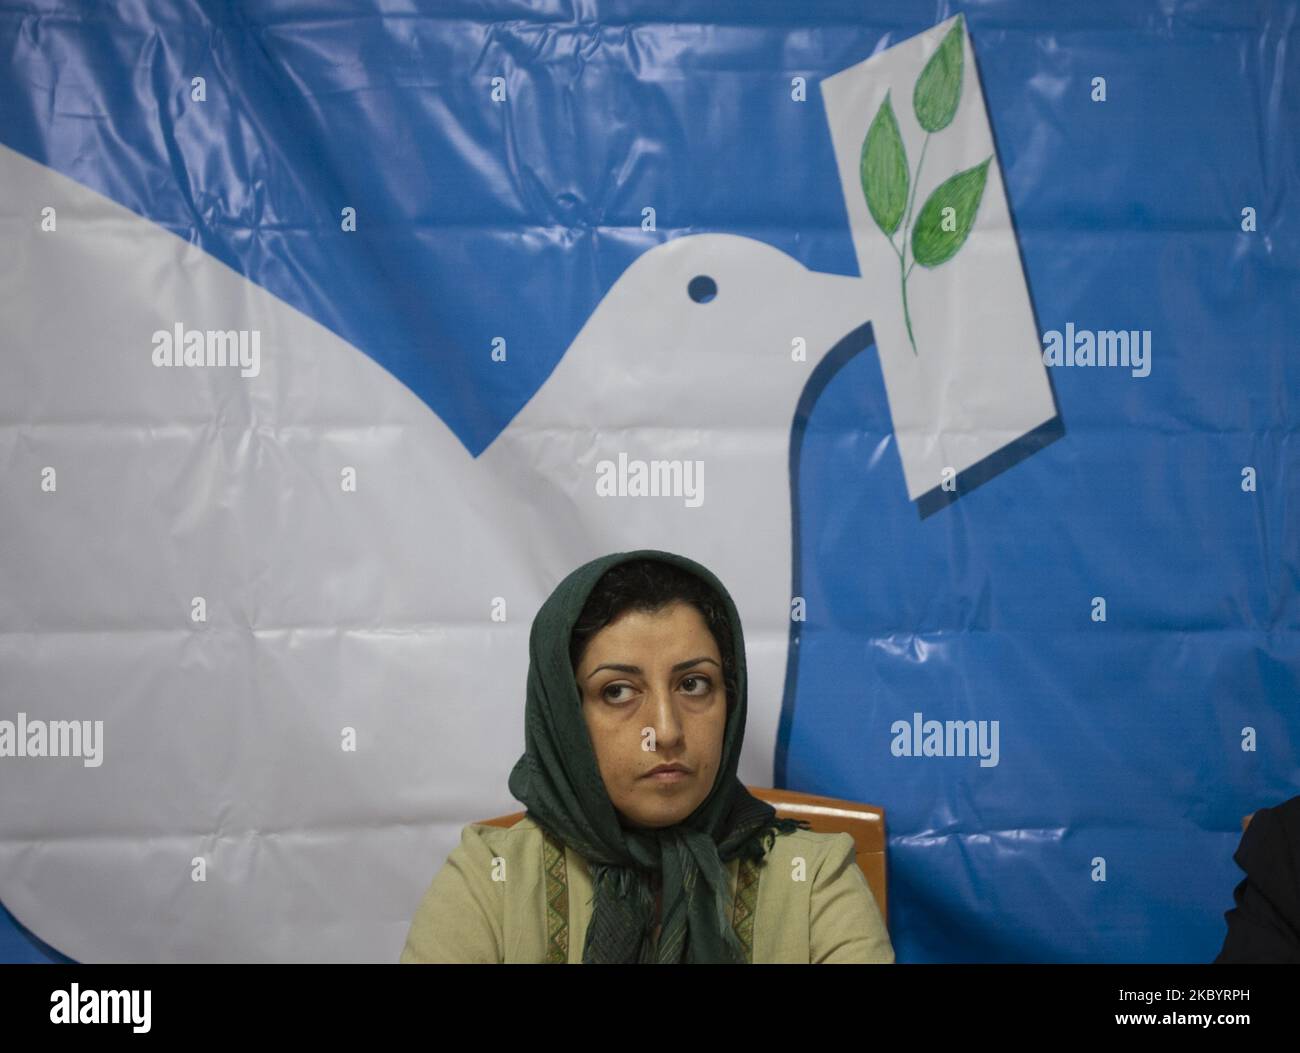 Iranian female human rights activist, Narges Mohammadi, looks on while attending a session in the former office of the Defenders of Human Rights Association in central Tehran, Iran on November 19, 2007. The group of 16 experts expressed grave concerns that Ms. Mohammadi appears to have contracted COVID-19 in Zanjan Prison. Ms. Mohammadi has been in detention since 2015 on charges that stem from her human rights work. She received a combined 16-year prison sentence in May 2016, of which she will need to serve 10 years under Iranian law, According to the office of the High Commissioners of the U Stock Photo